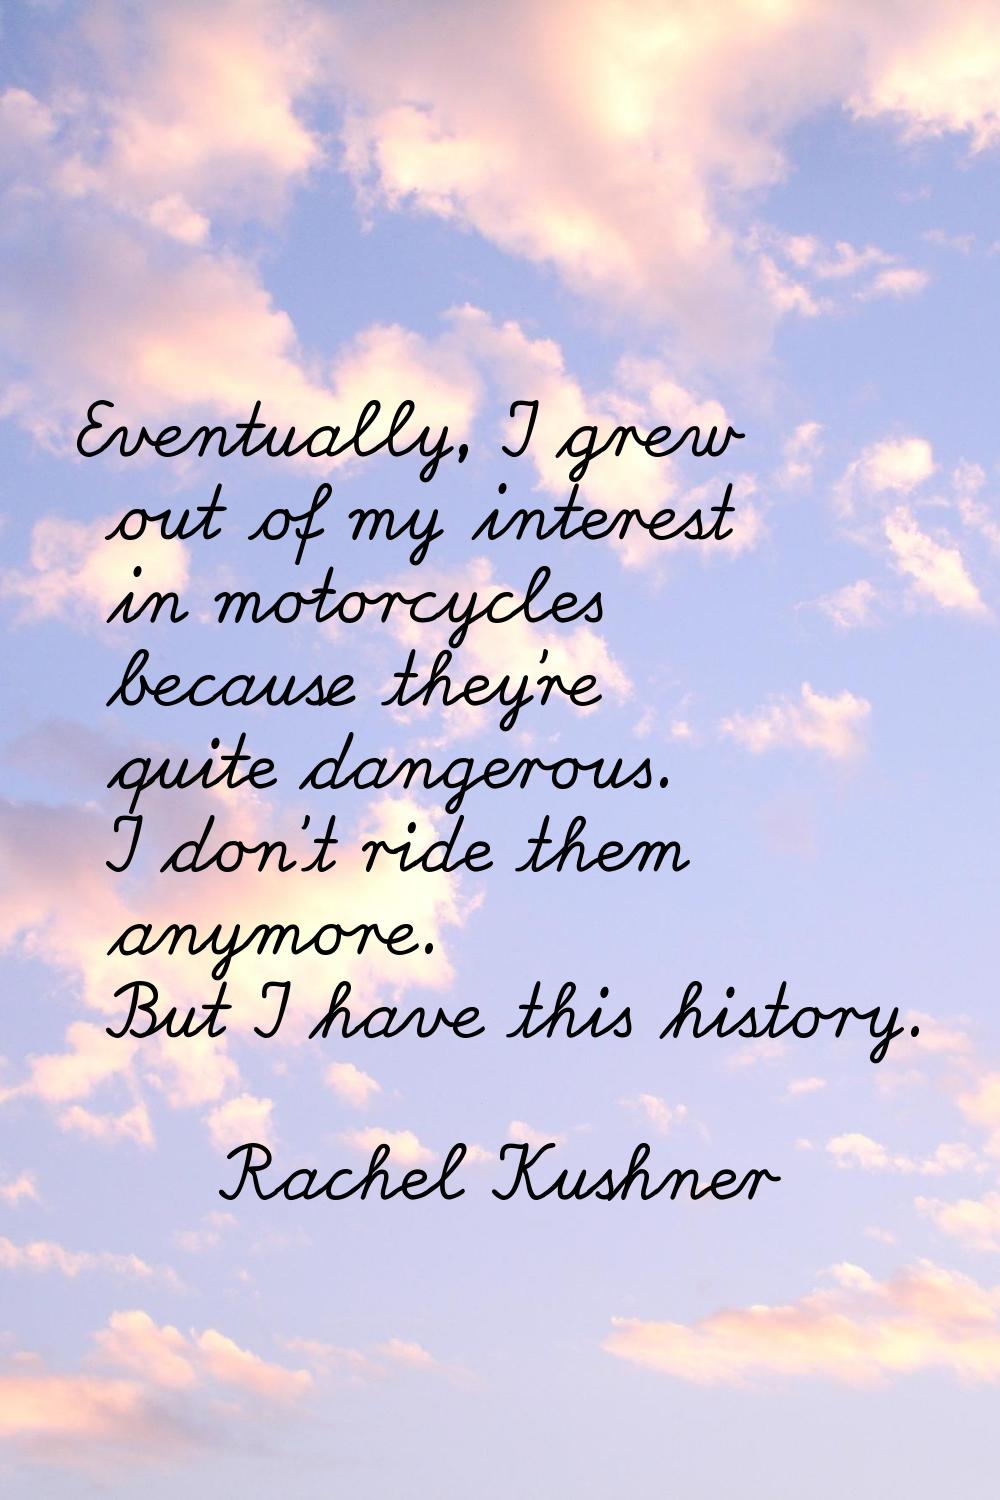 Eventually, I grew out of my interest in motorcycles because they're quite dangerous. I don't ride 